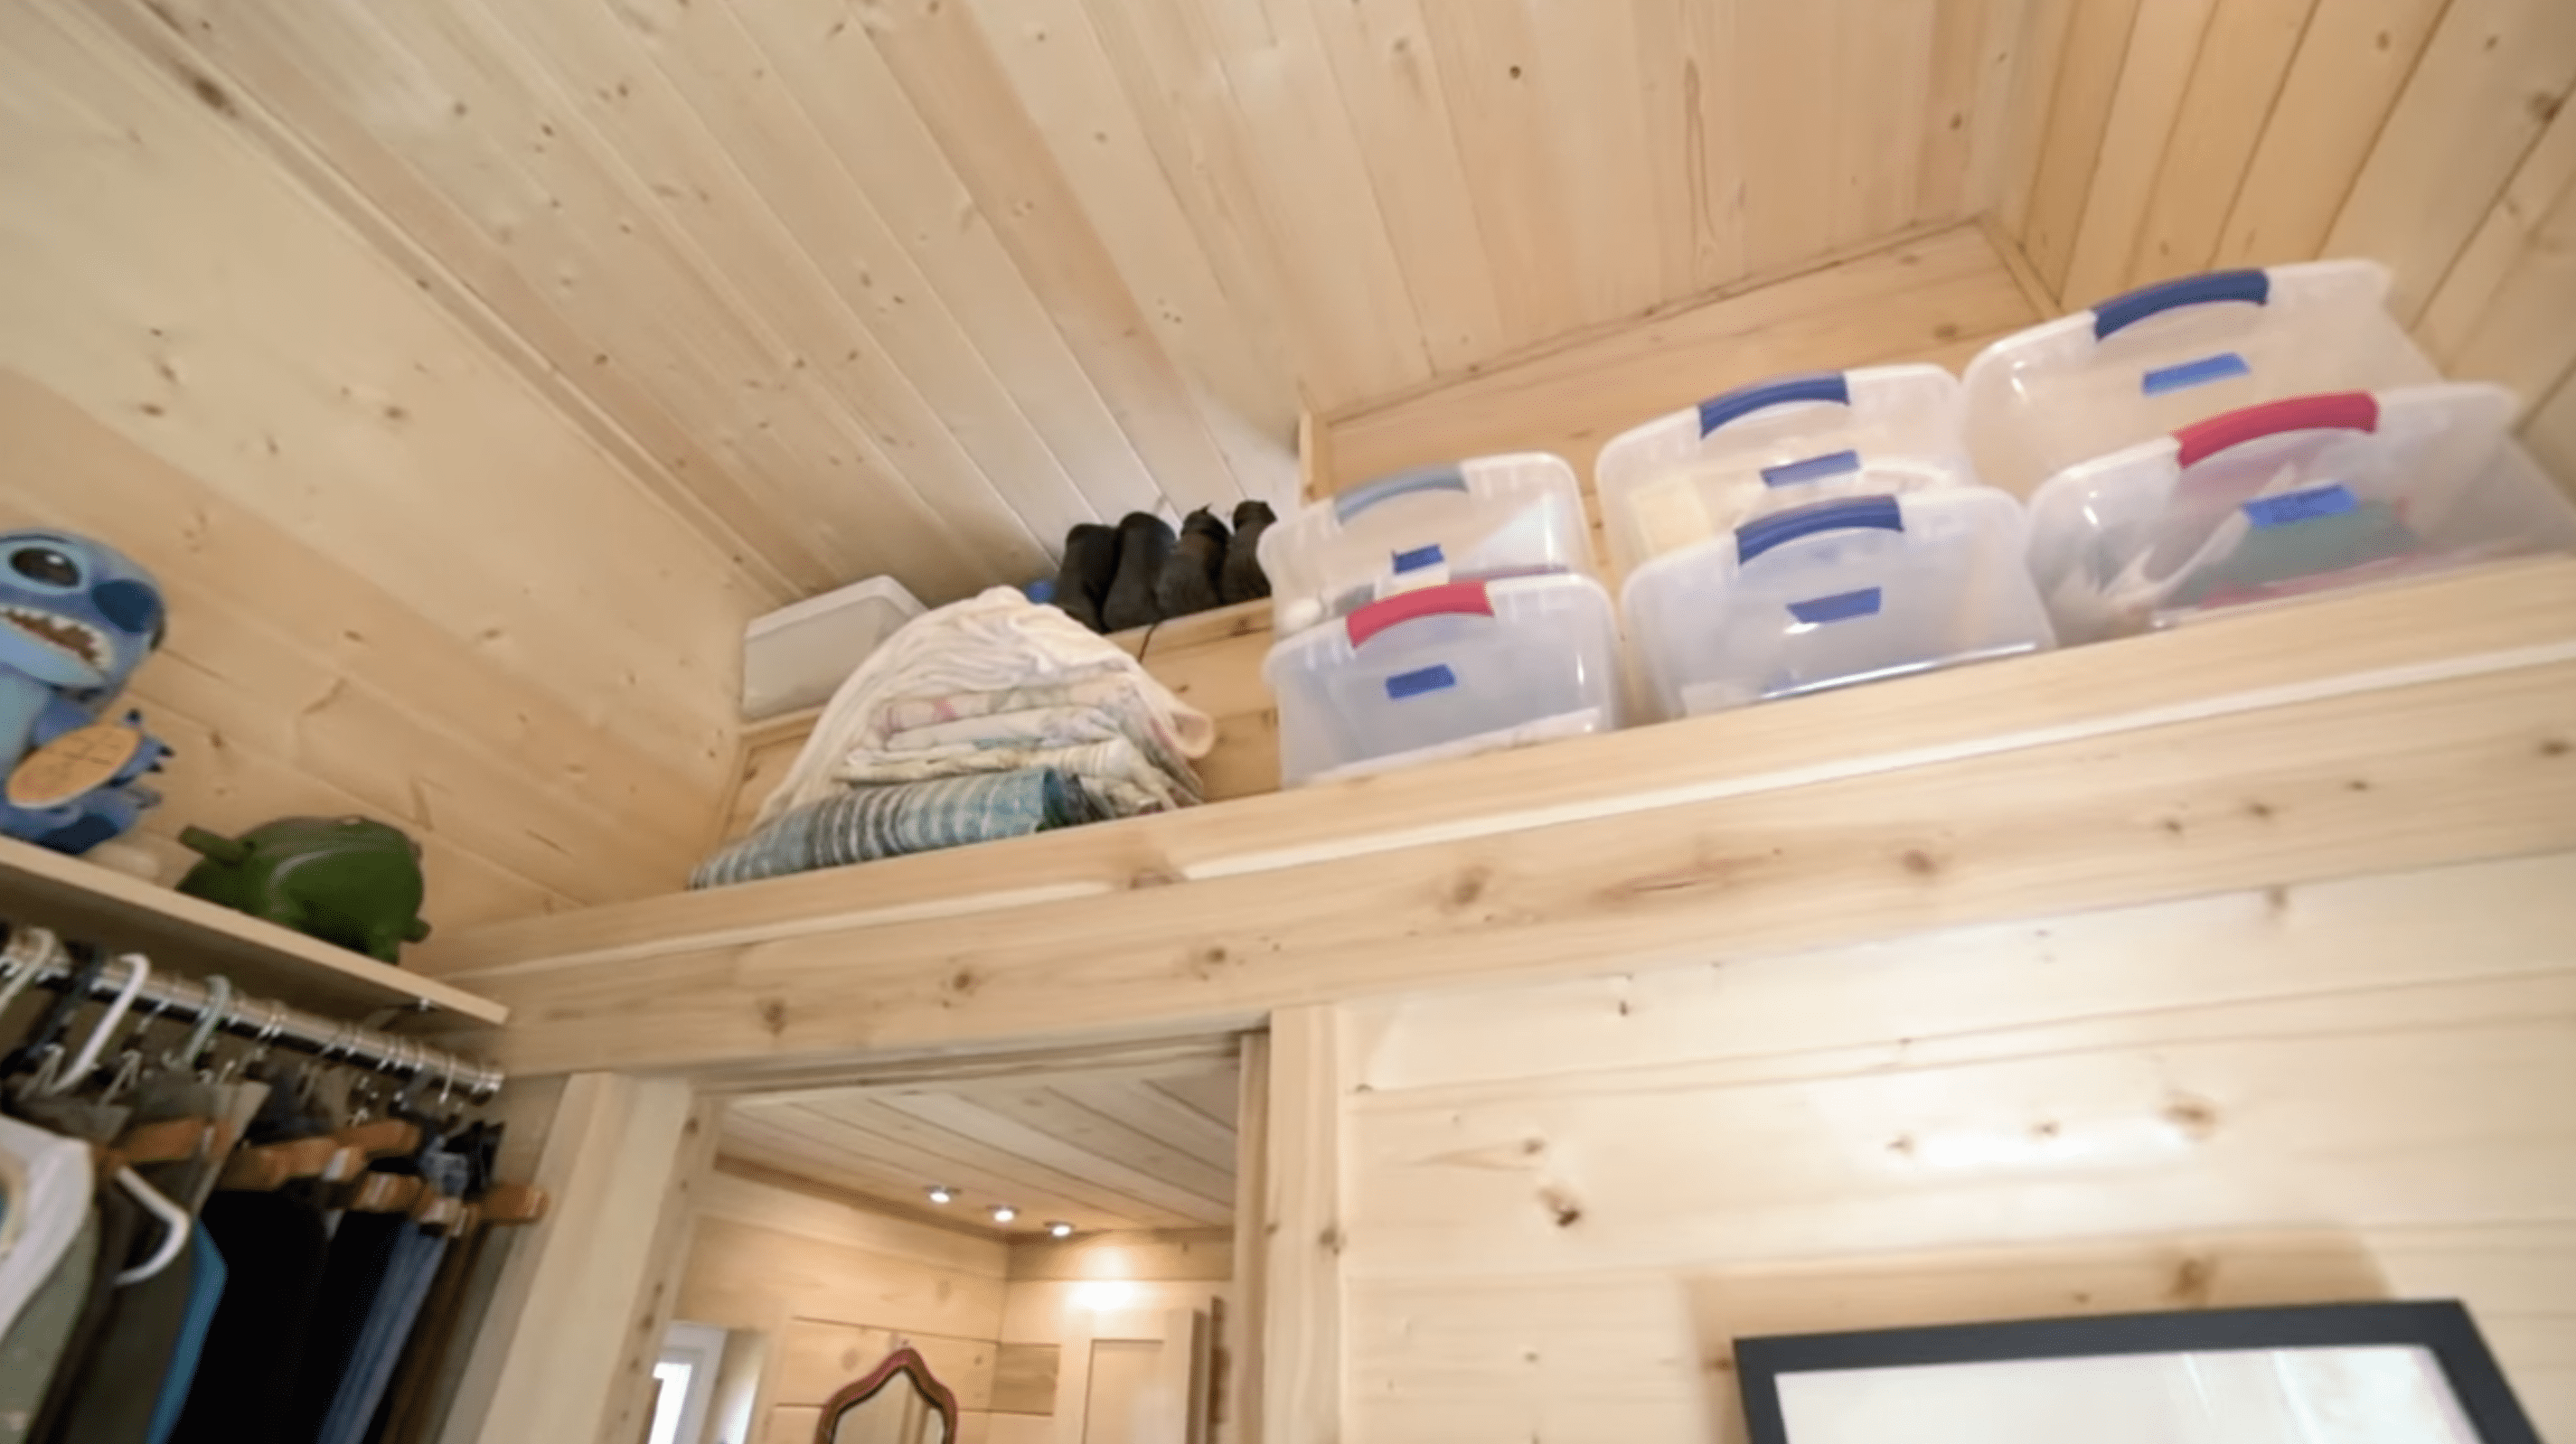 The high ceilings come with extra storage to hold miscellaneous items. | Source: YouTube.com/TinyHomeTours